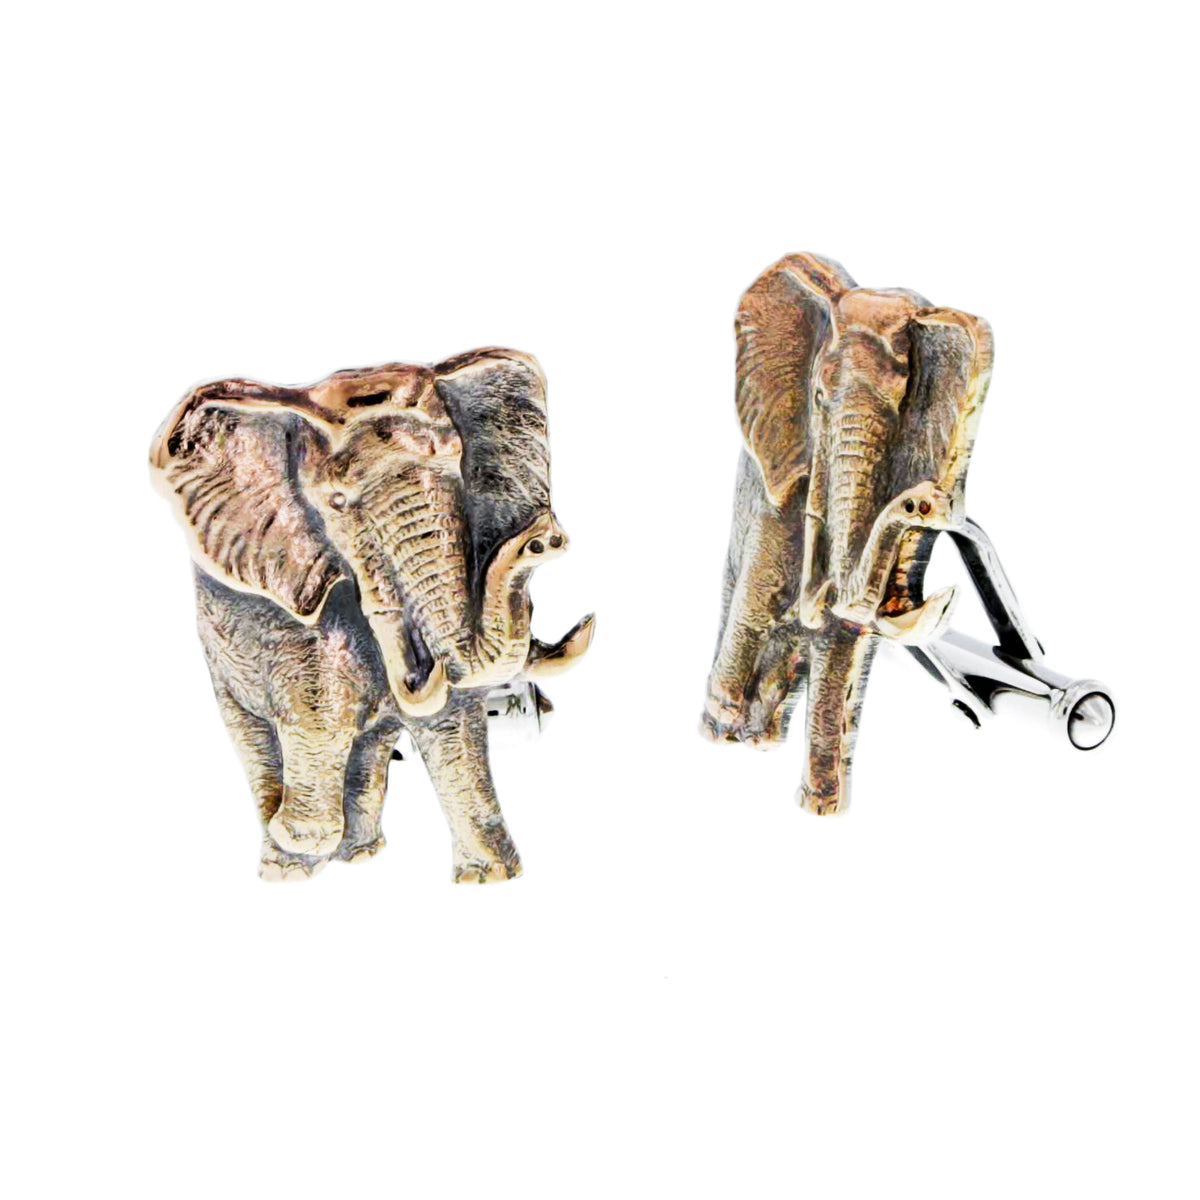 Sterling silver cuff links with large 14 karat rose gold elephant